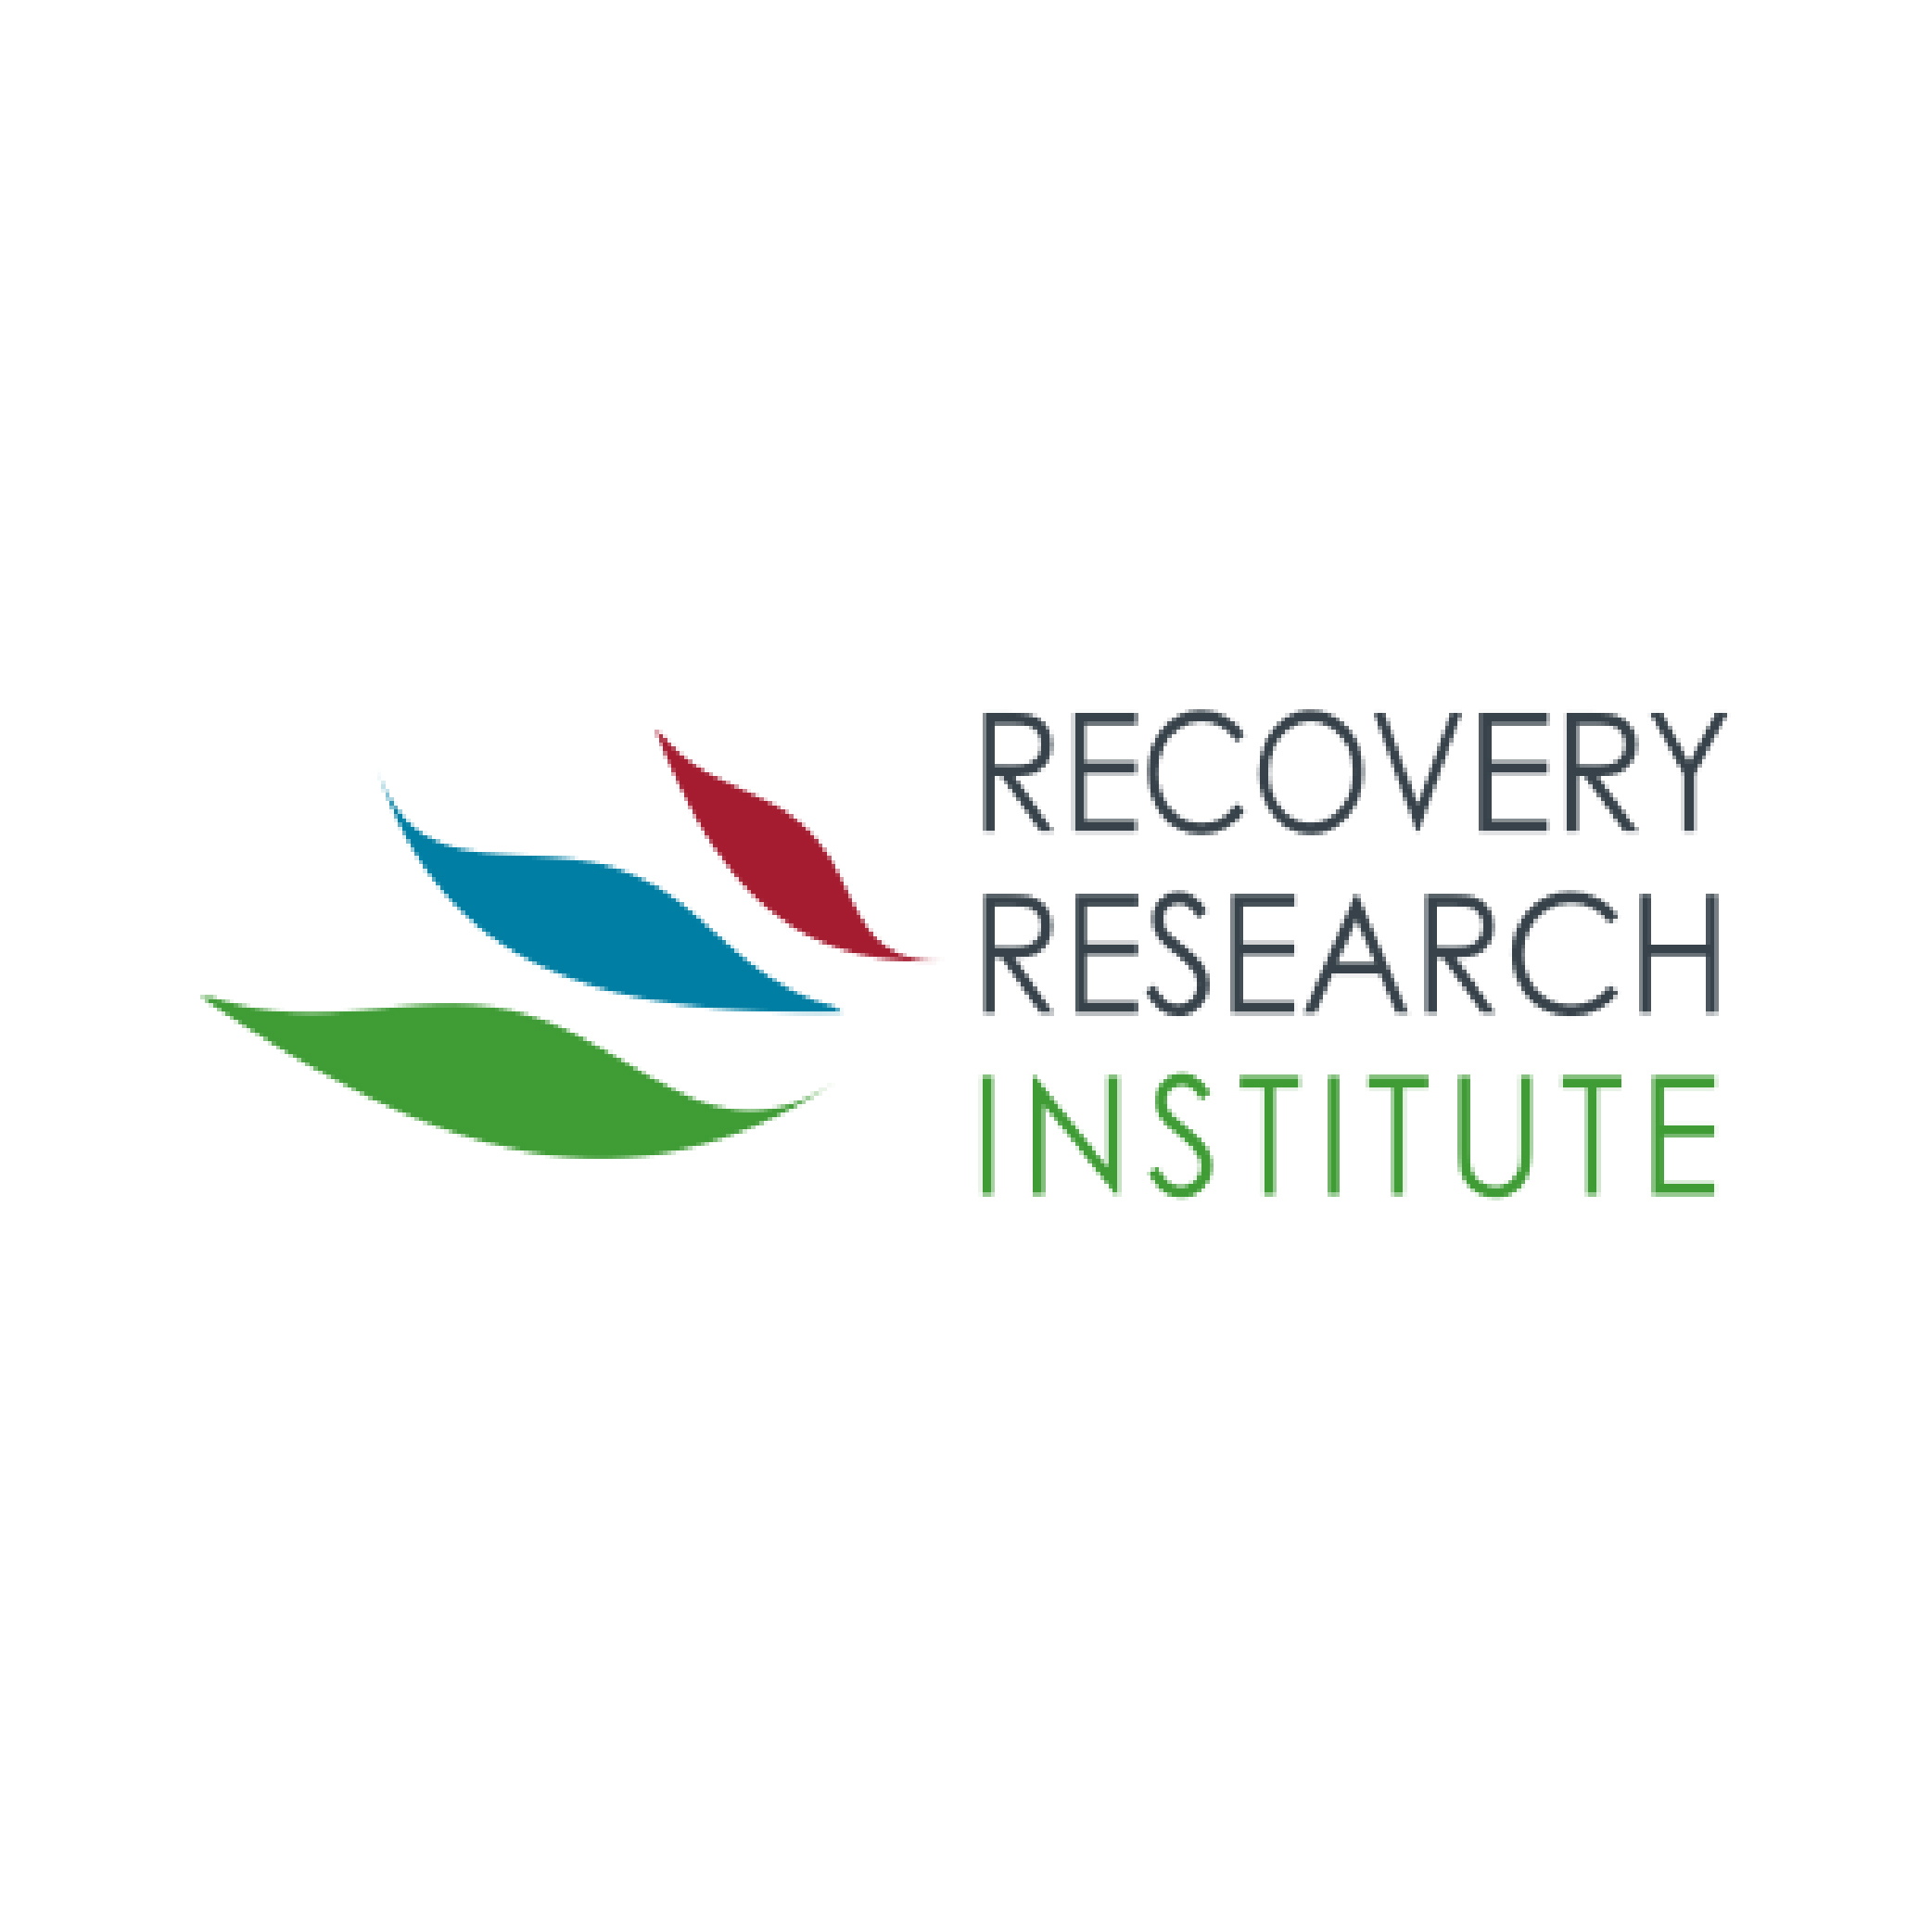 Recovery Research Institute logo